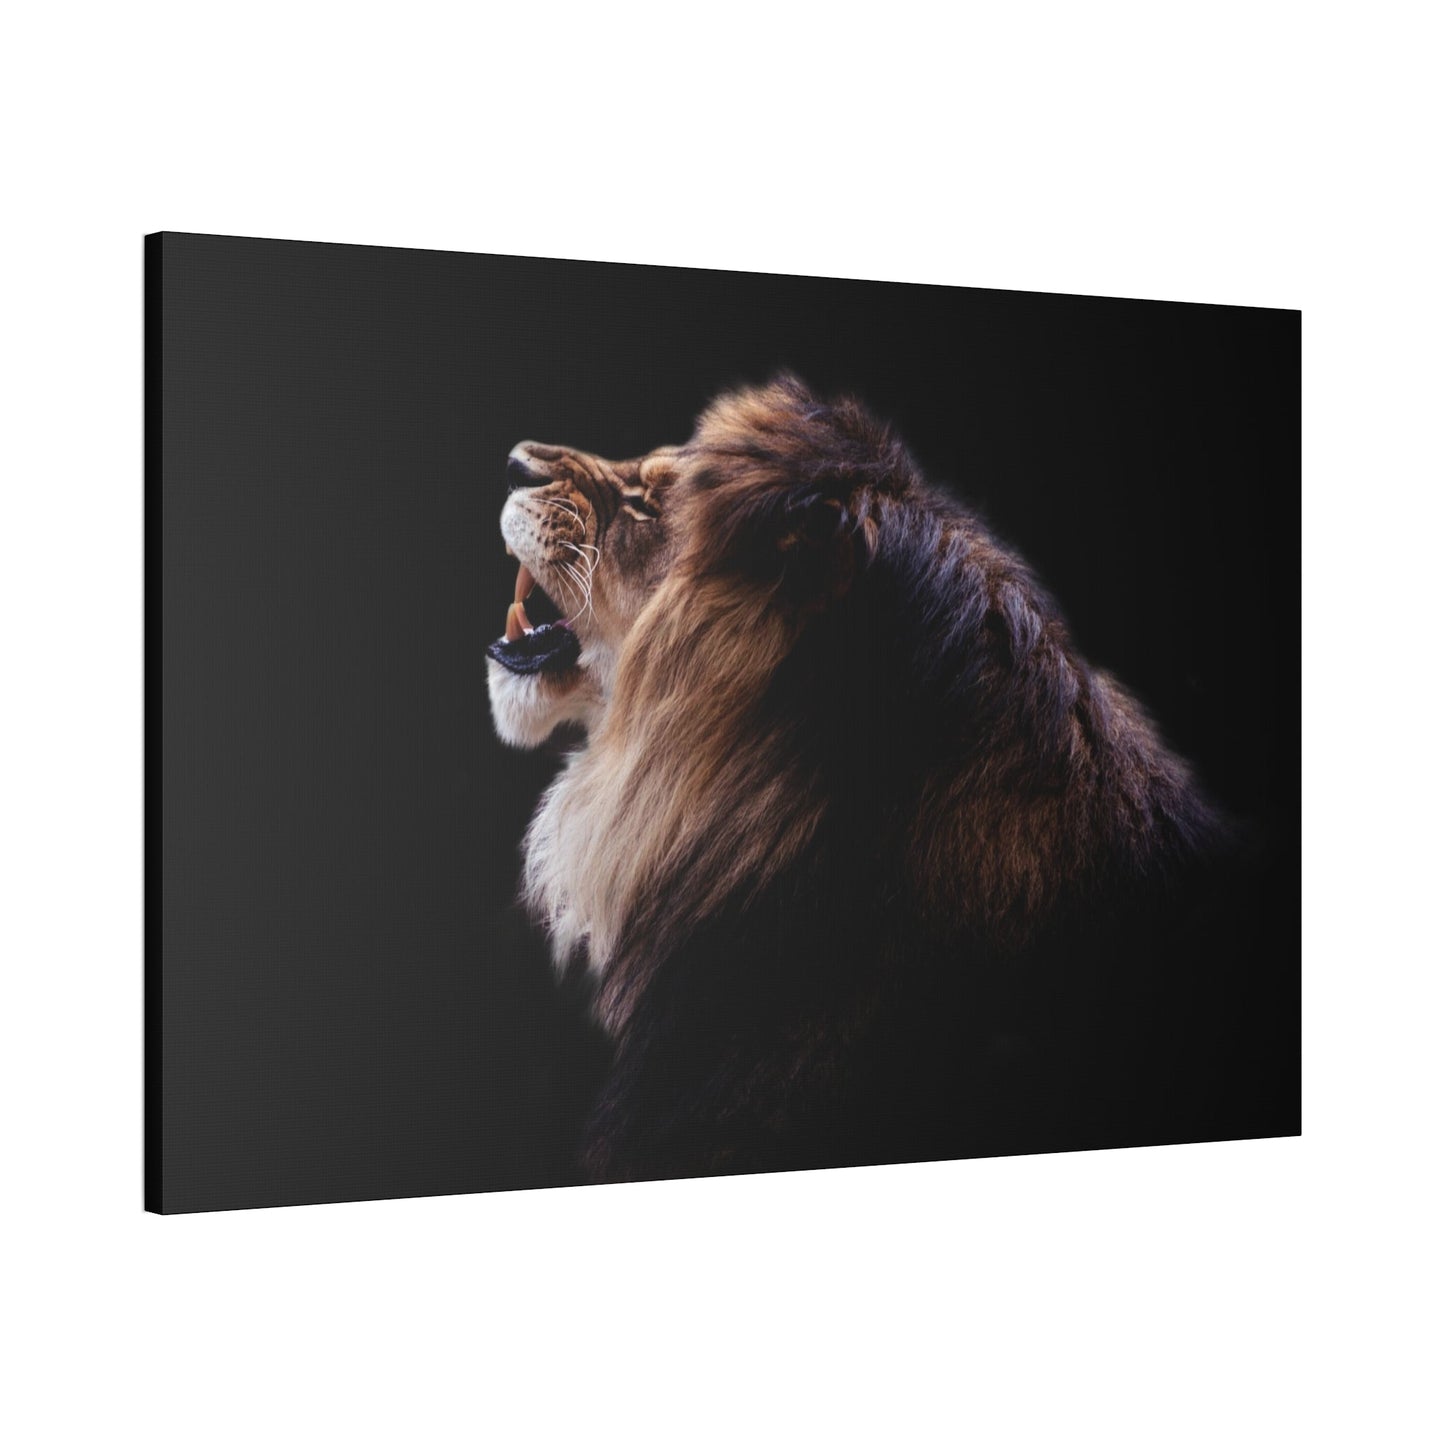 The Lion's Majesty: Framed Poster of the King of Beasts